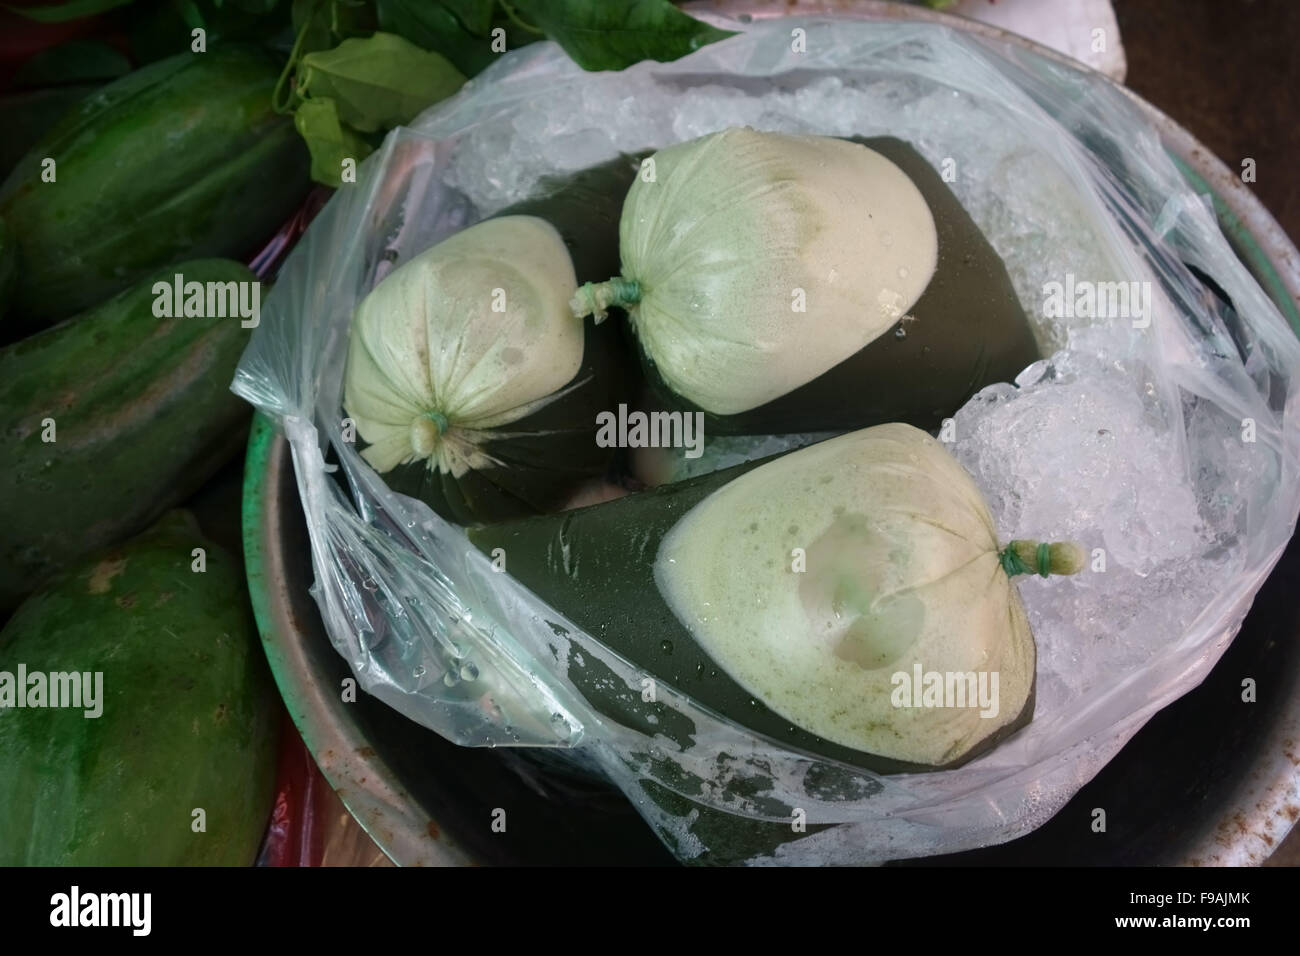 Gotu kola or centella juice for sale in bags on a stall in a Bangkok wet food market, Thailand Stock Photo